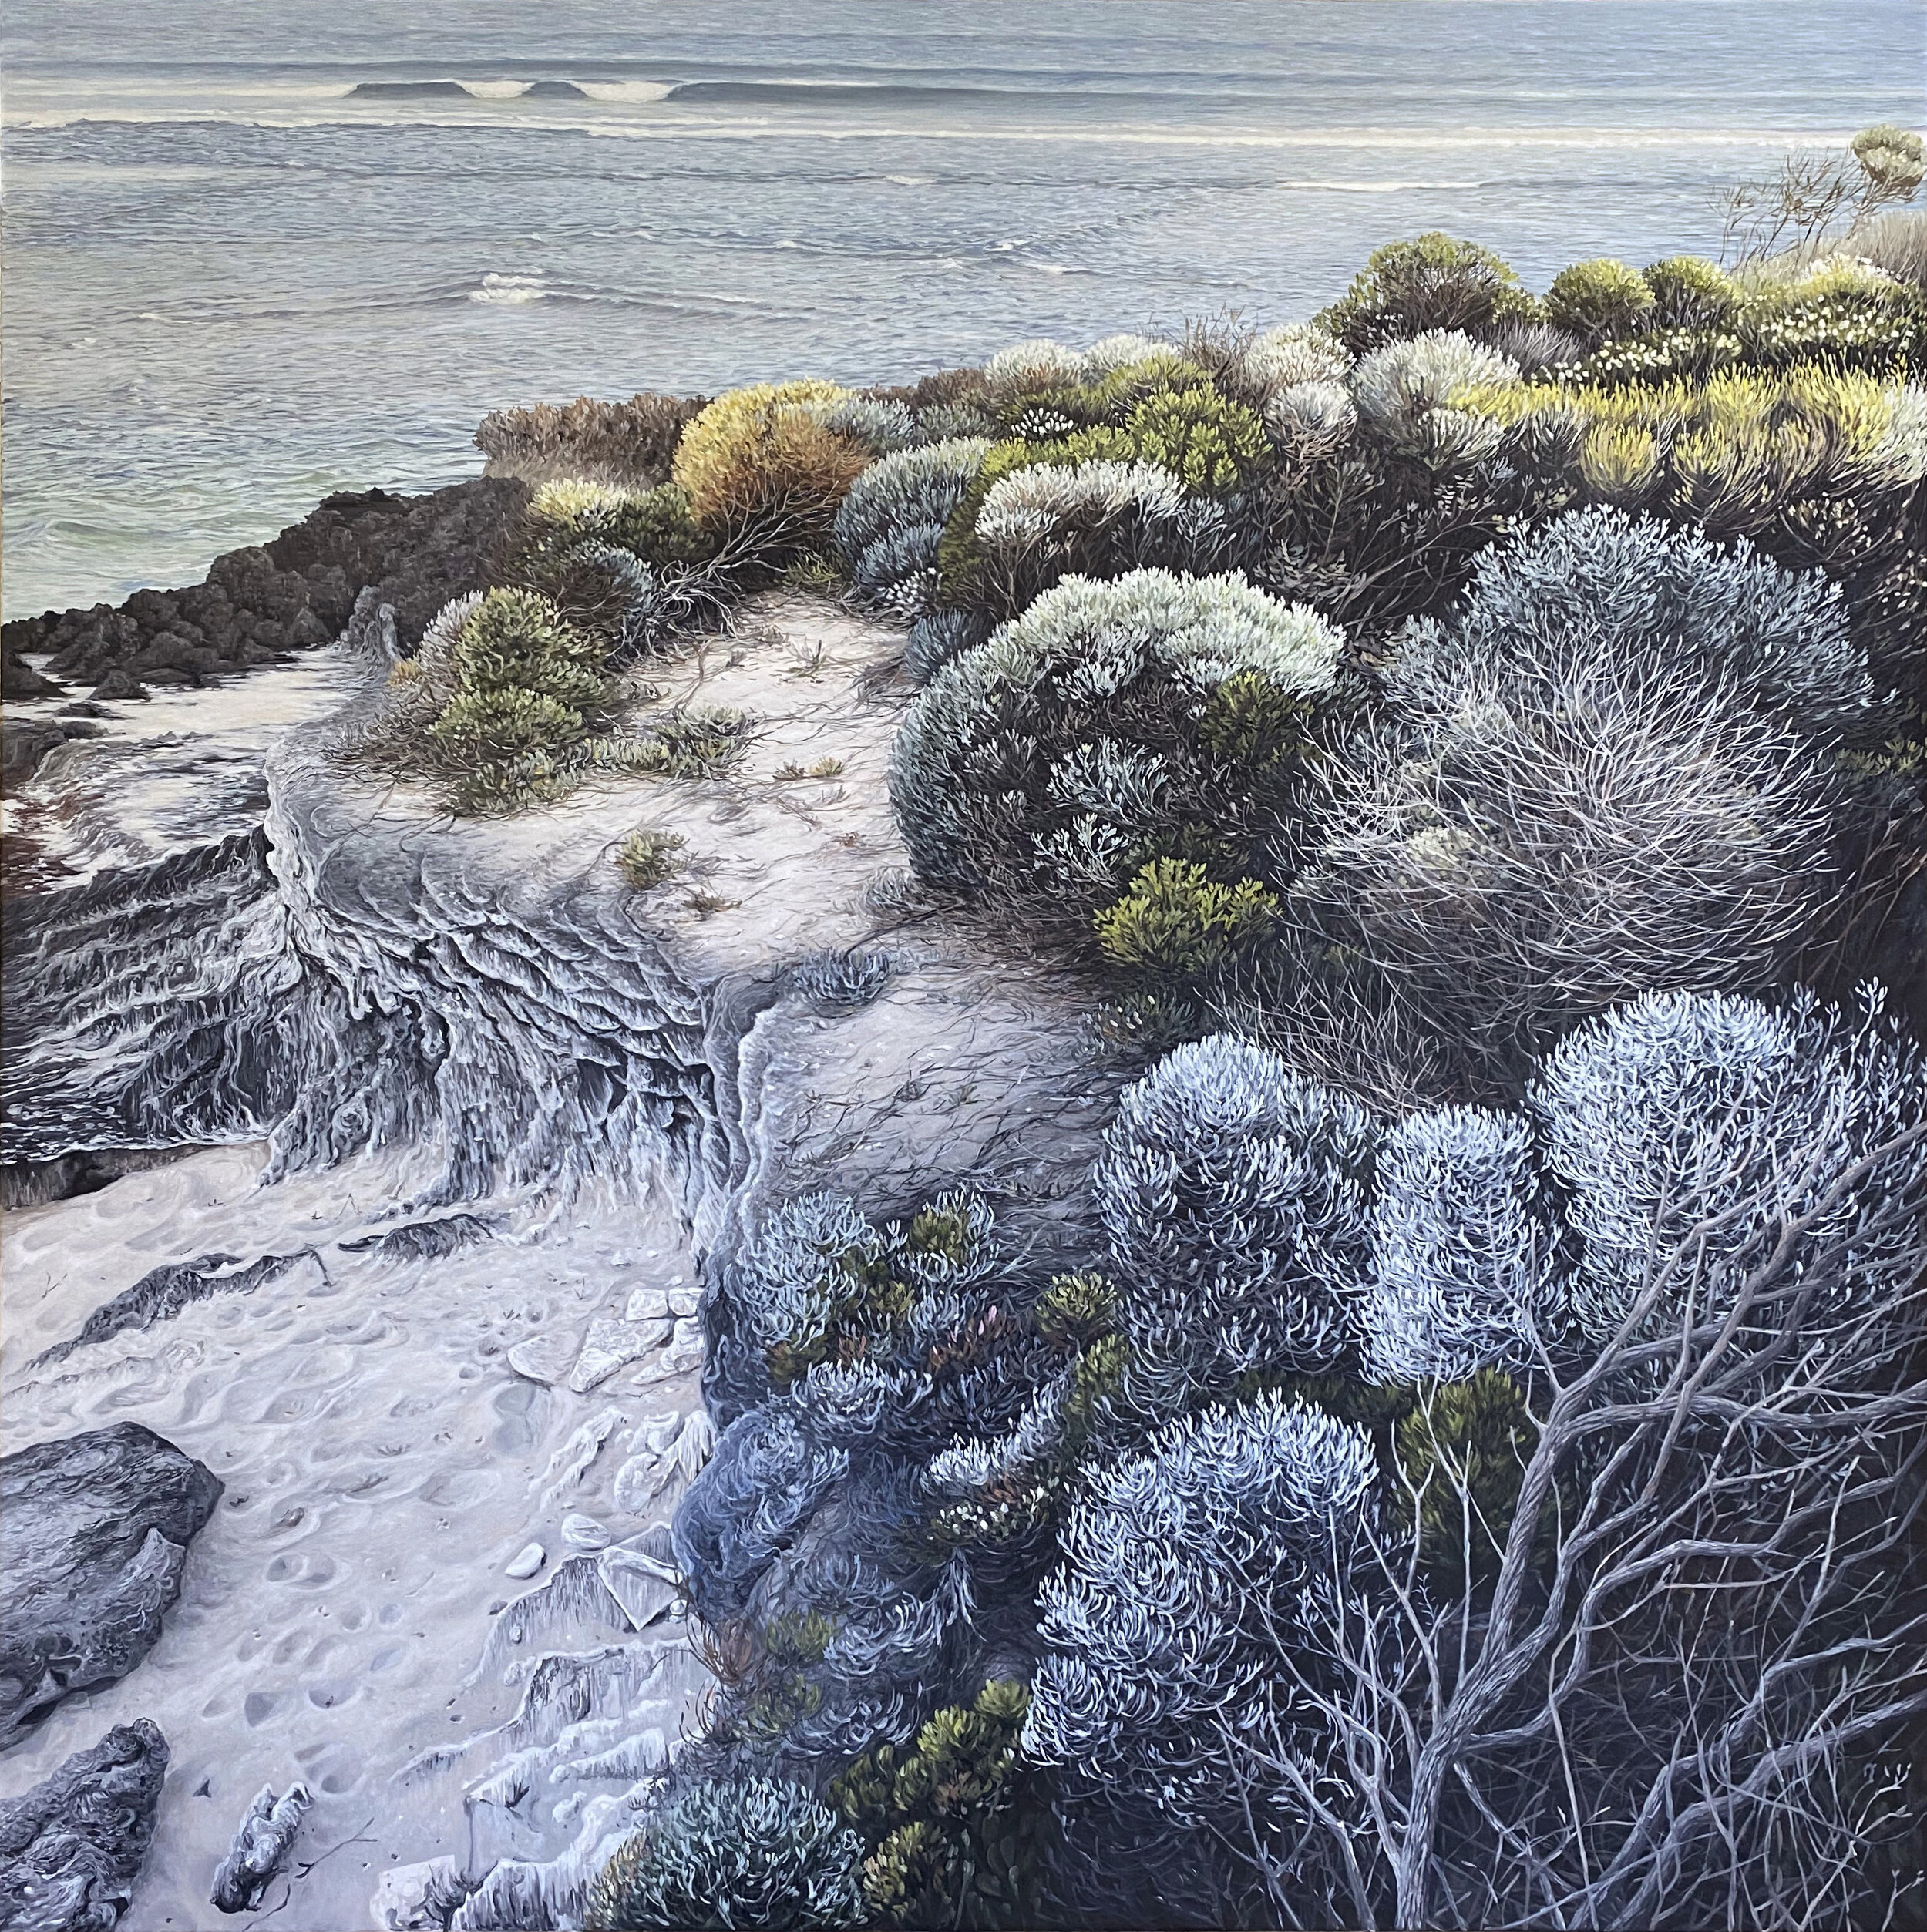   Colour Play of Coastal Life  Finalist   Muswellbrook Art Prize  Oil on Canvas 137 x 137cm  Sold 